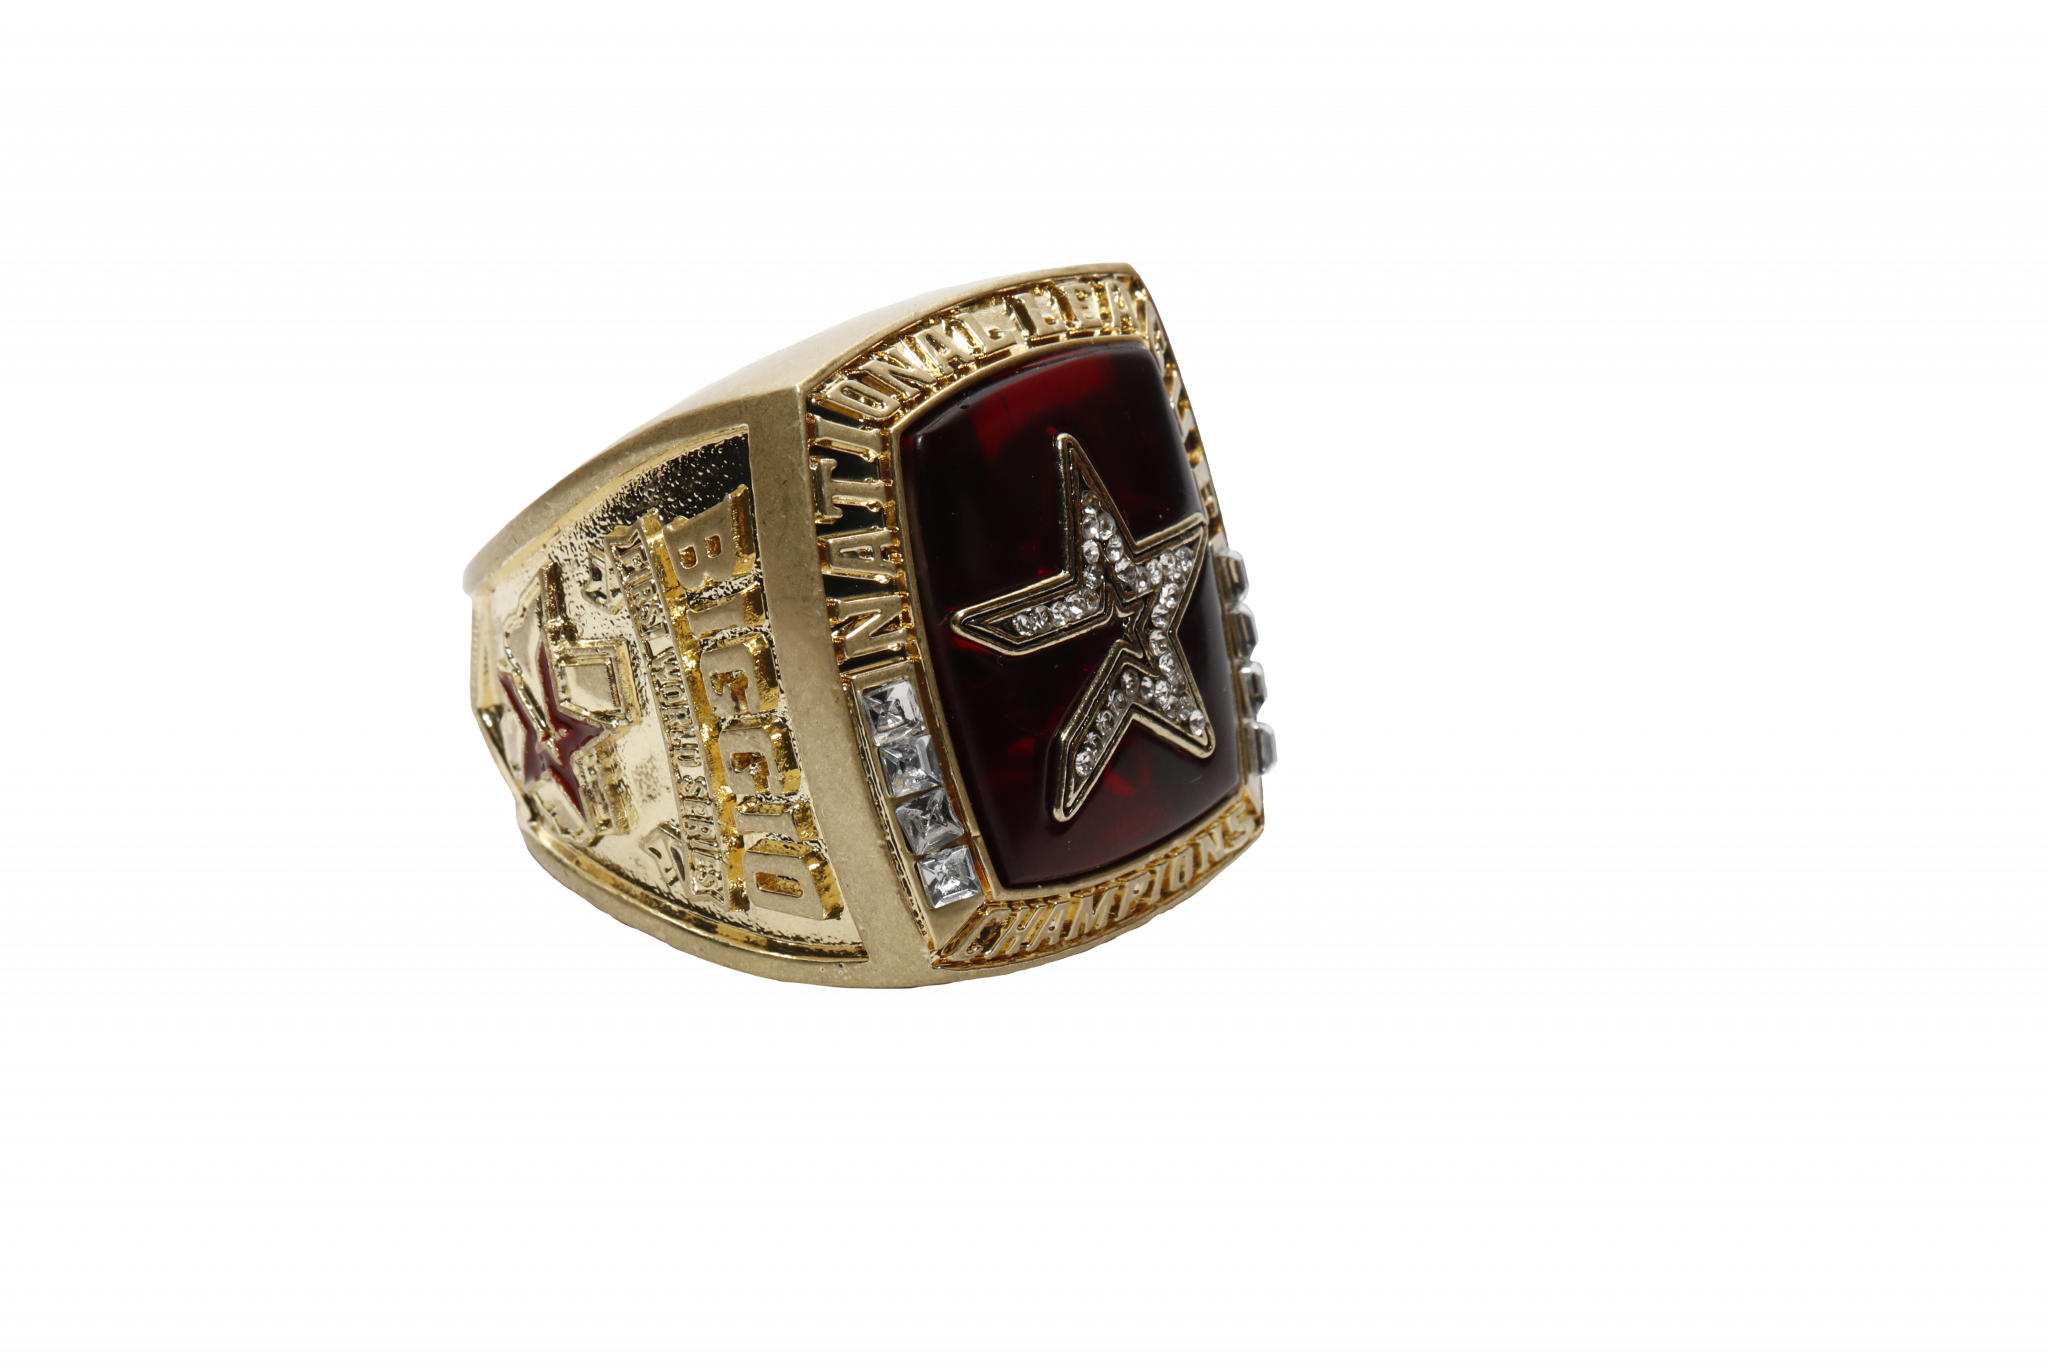 Houston Astros - We've got 8 more ring giveaway days this